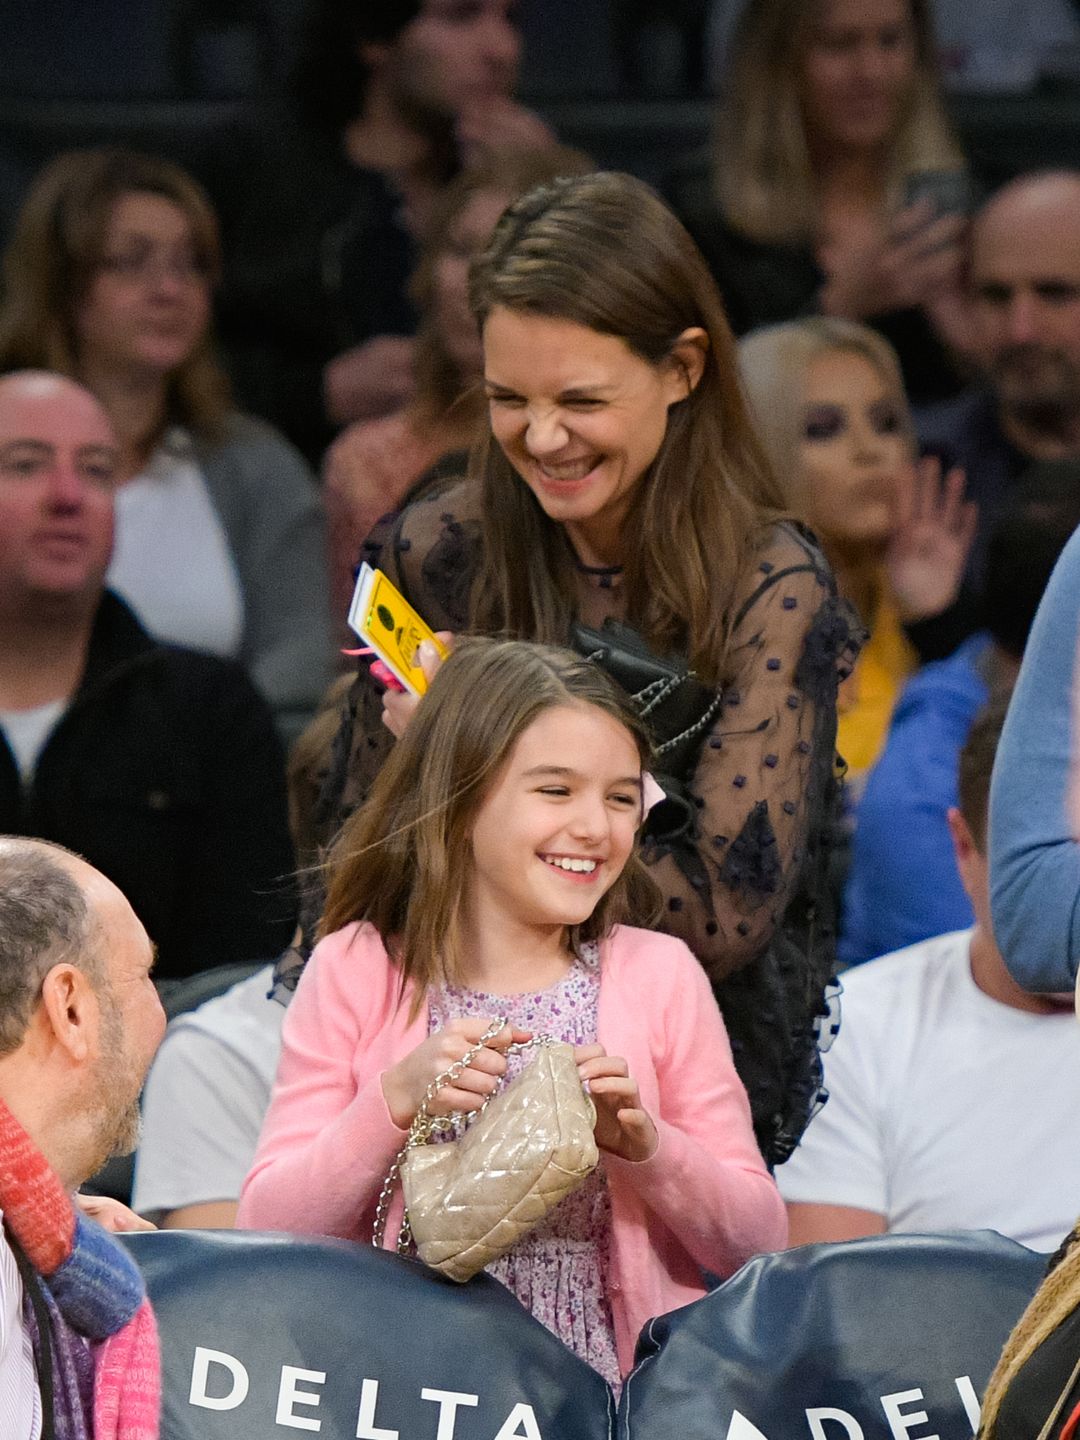 Suri Cruise (Right) and Katie Holmes attend a basketball game between the Detroit Pistons and the Los Angeles Lakers at Staples Center on January 15, 2017 in Los Angeles, California.